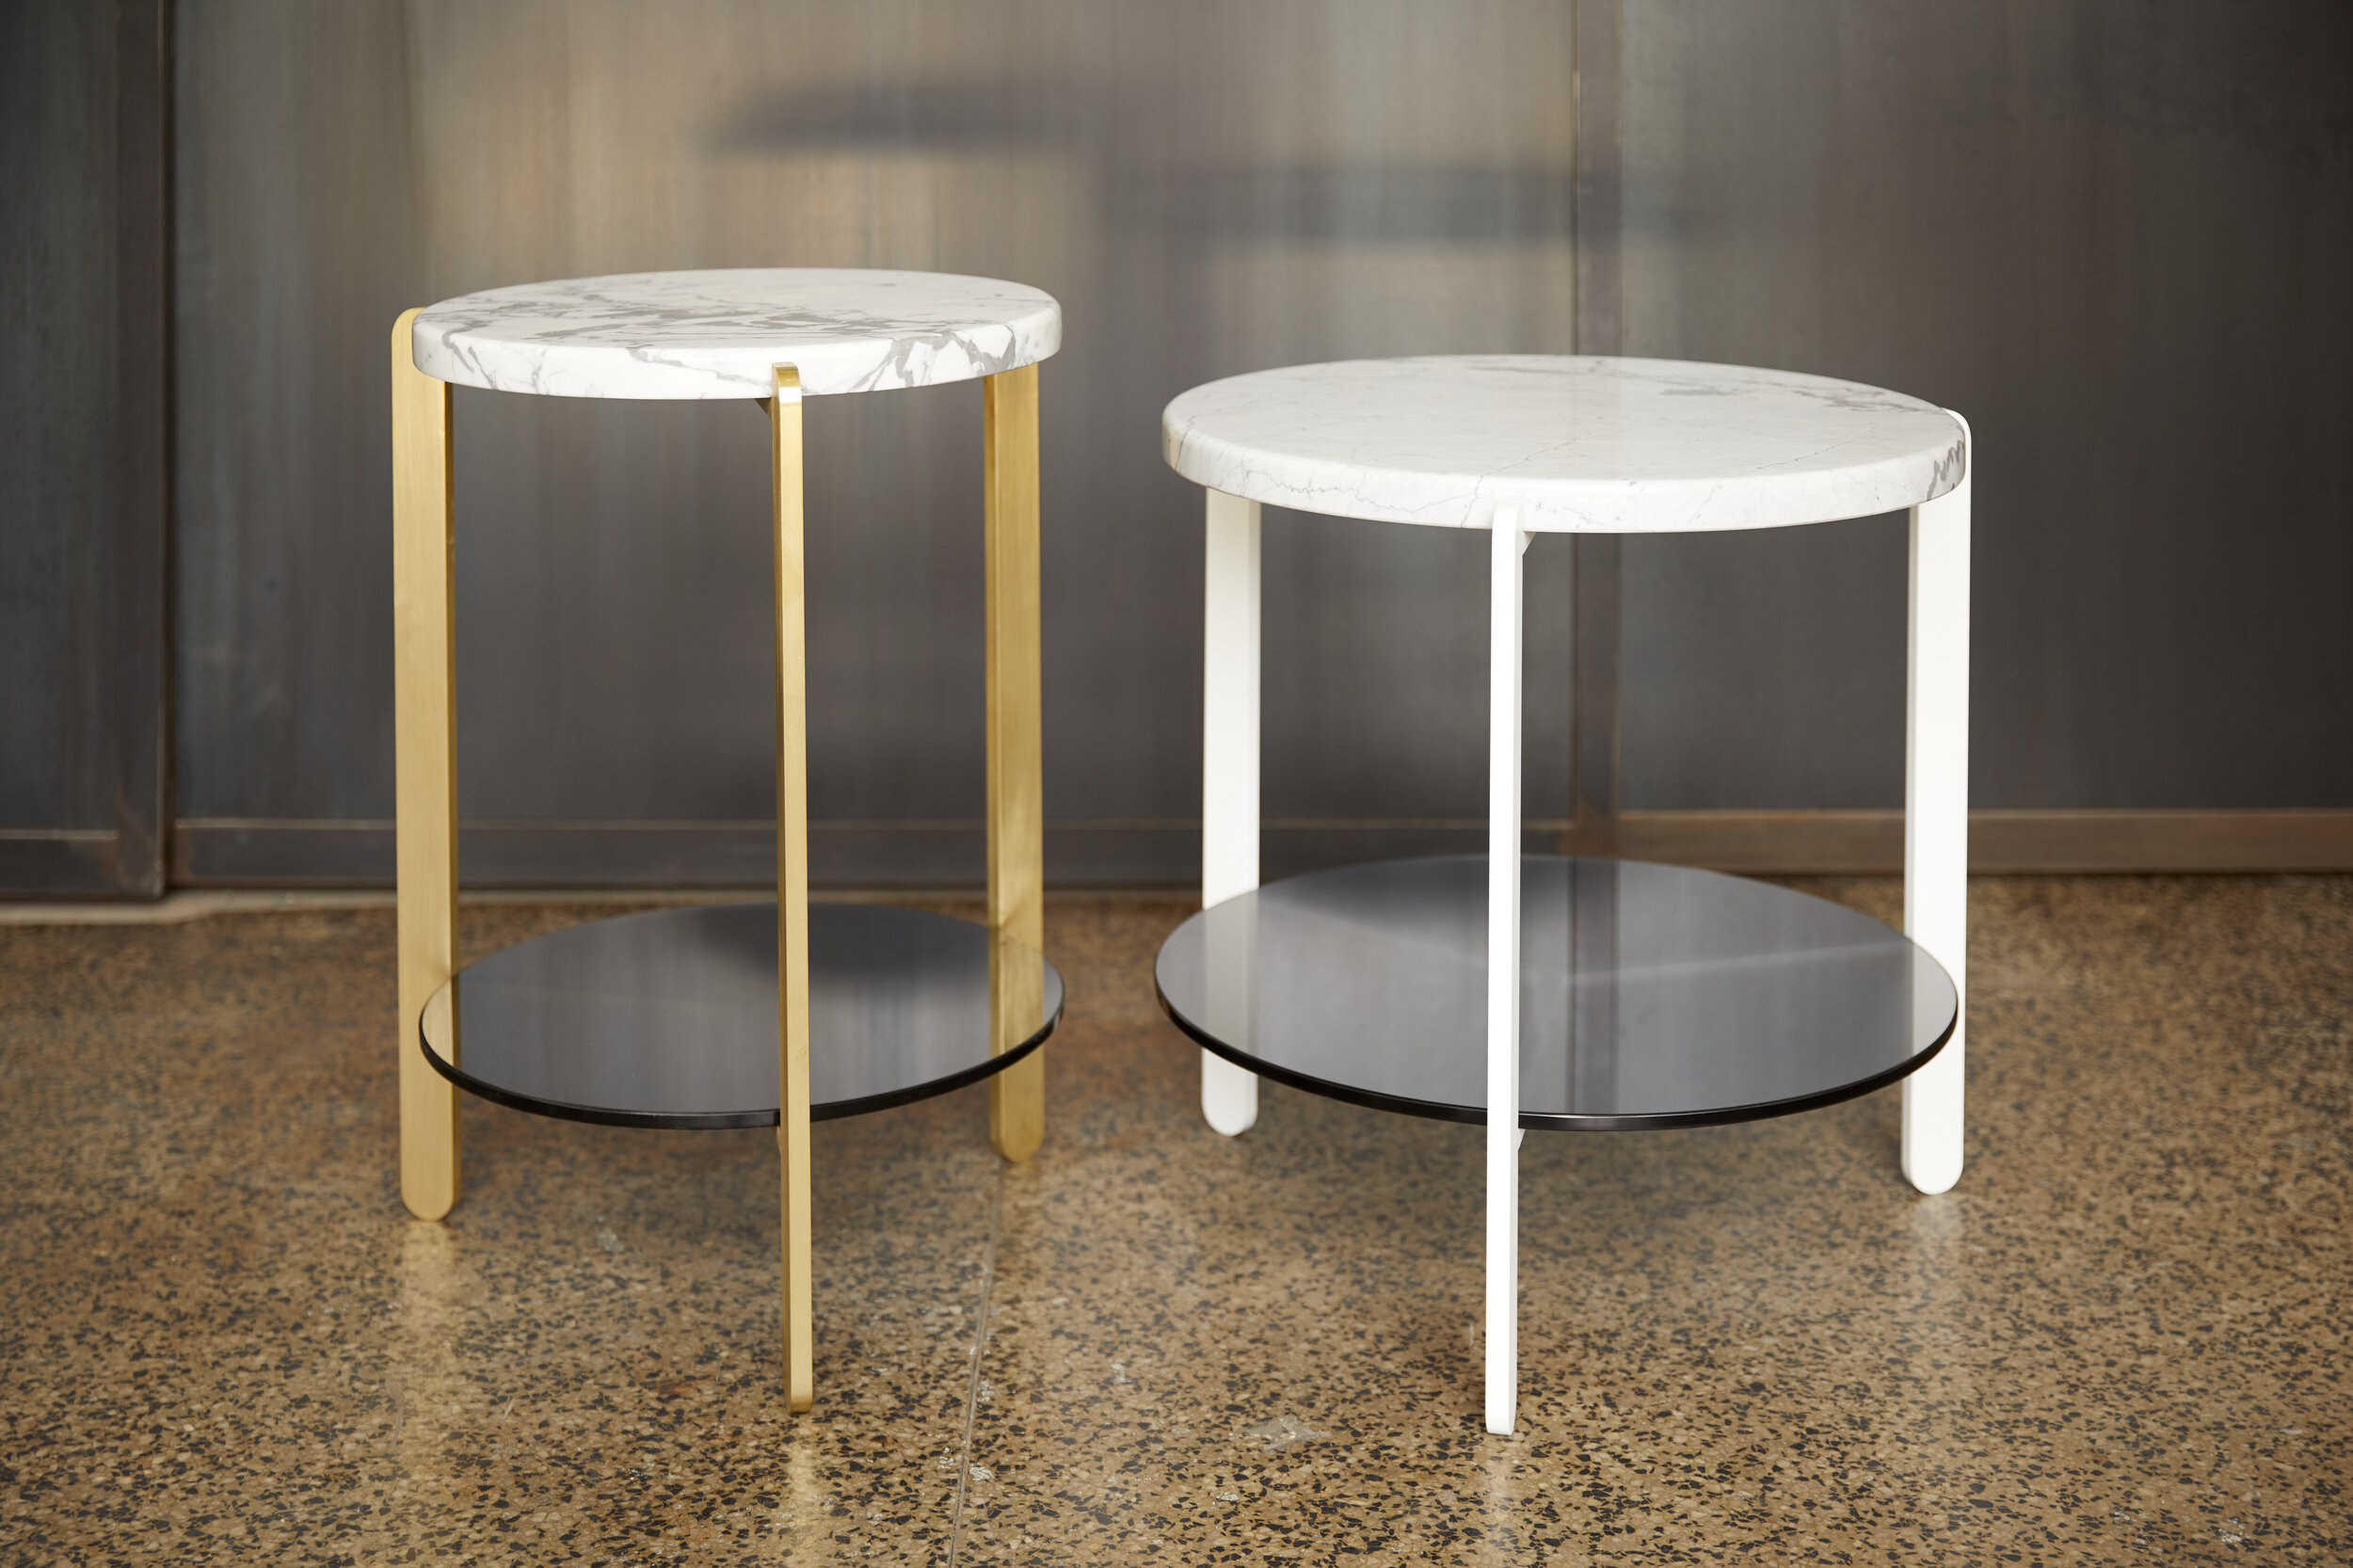 Can be a Solo Side Table or Paired up to create a more dynamic moment.